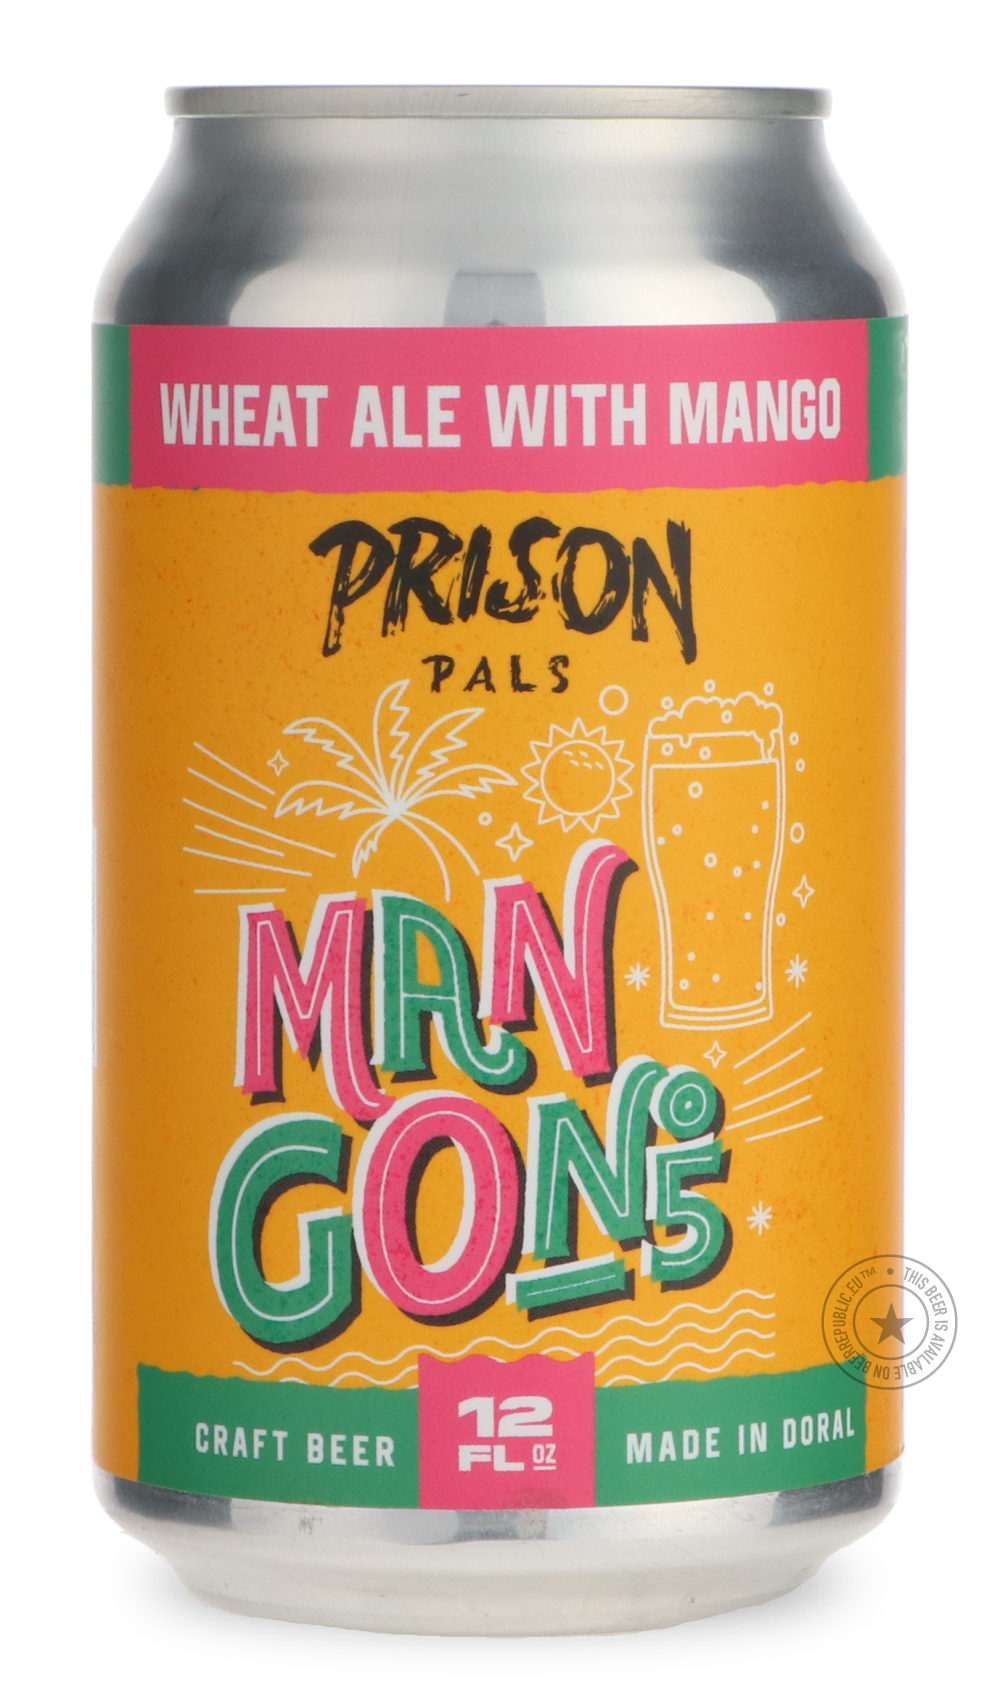 -Prison Pals- Mango Nº5-Pale- Only @ Beer Republic - The best online beer store for American & Canadian craft beer - Buy beer online from the USA and Canada - Bier online kopen - Amerikaans bier kopen - Craft beer store - Craft beer kopen - Amerikanisch bier kaufen - Bier online kaufen - Acheter biere online - IPA - Stout - Porter - New England IPA - Hazy IPA - Imperial Stout - Barrel Aged - Barrel Aged Imperial Stout - Brown - Dark beer - Blond - Blonde - Pilsner - Lager - Wheat - Weizen - Amber - Barley W